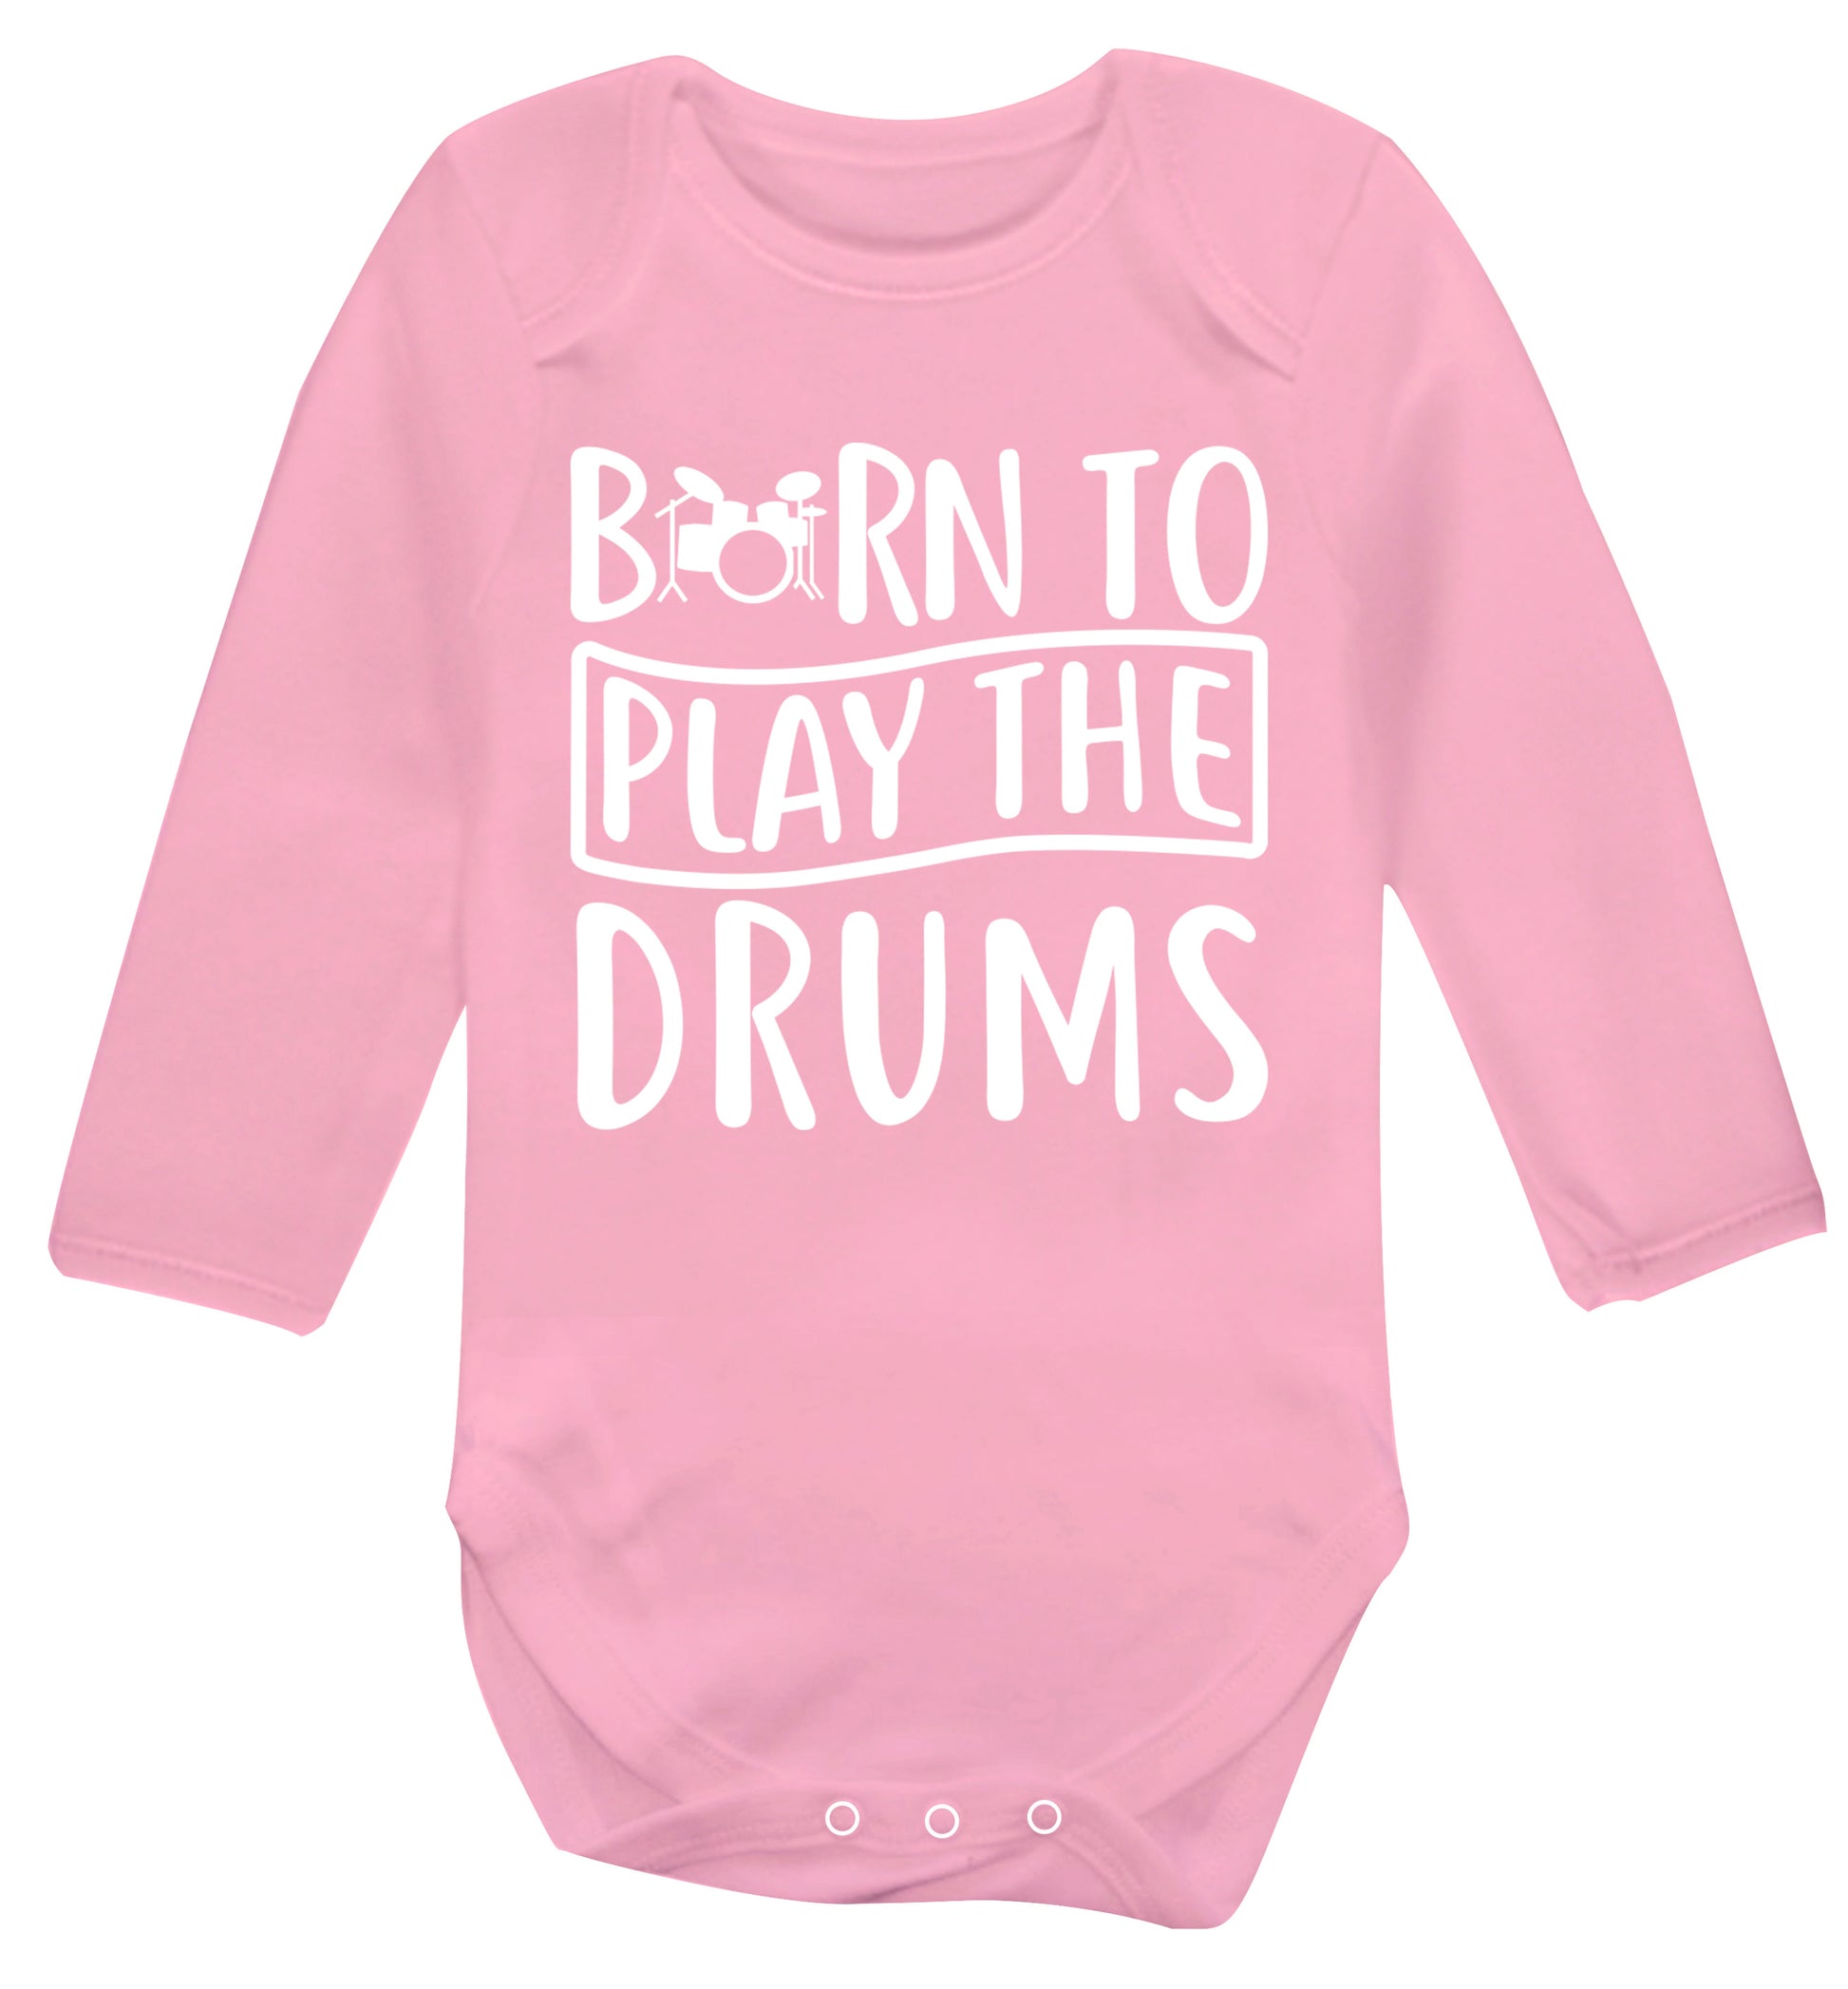 Born to play the drums Baby Vest long sleeved pale pink 6-12 months